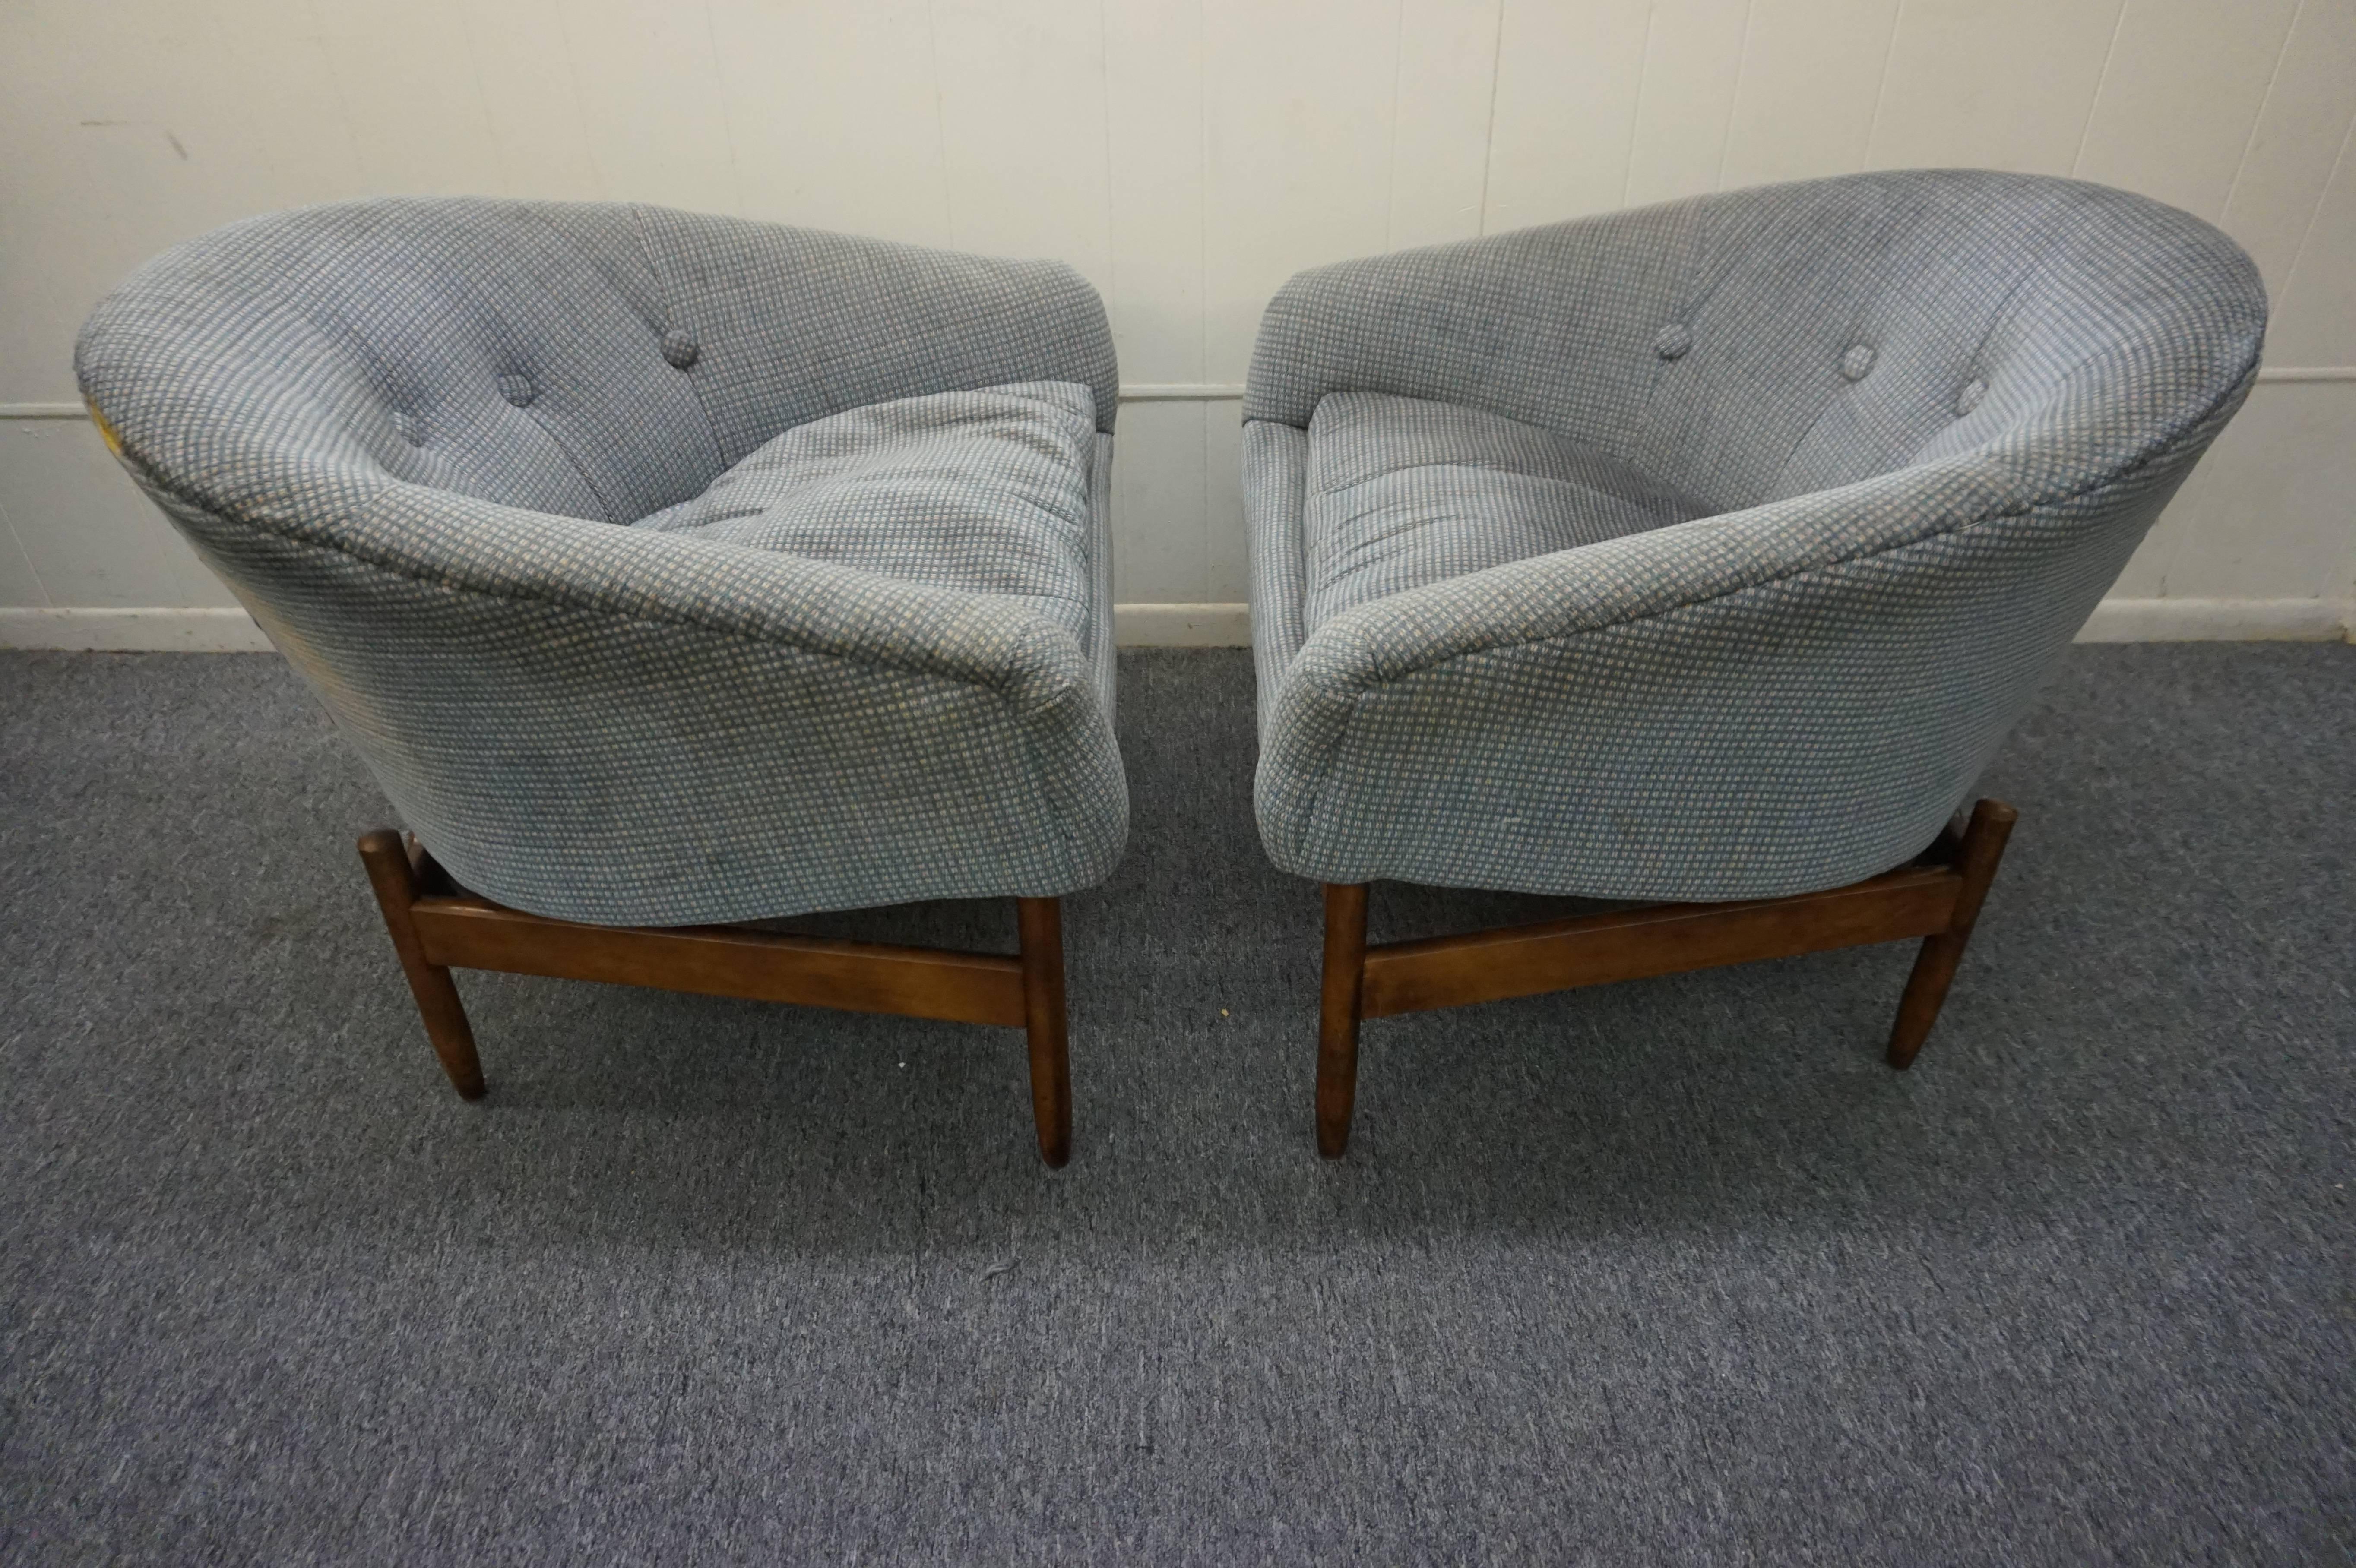 Very uncommonly seen pair barrel back chairs designed by Lawrence Peabody. They features a sculptural walnut base and Classic barrel back tub chair design. The chairs are structurally sound but needs to be re-upholstered.